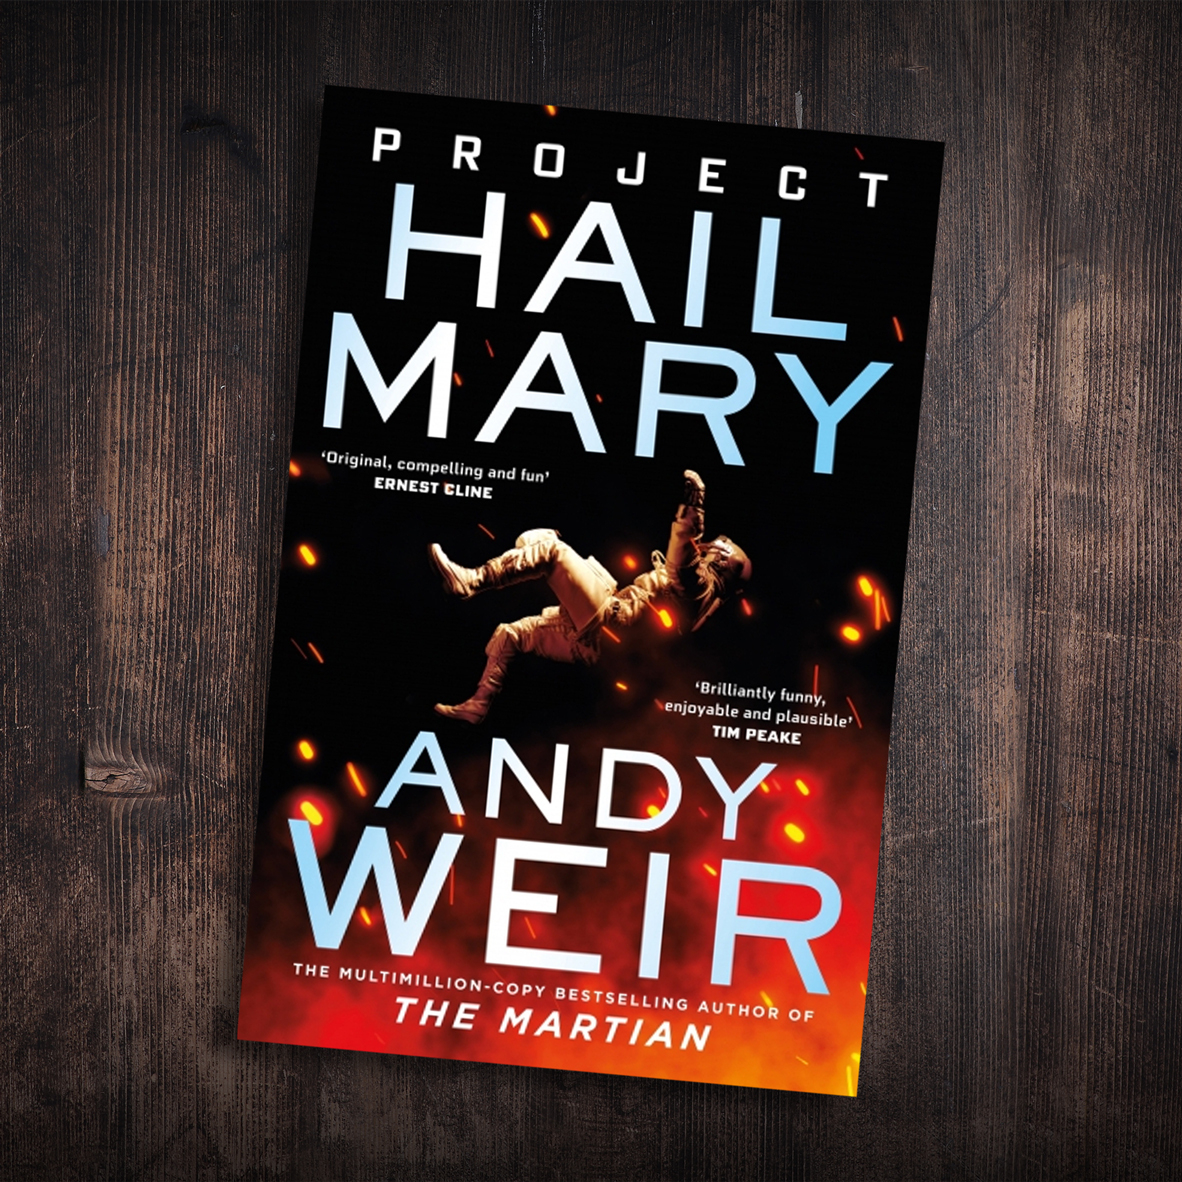 project hail mary artemis